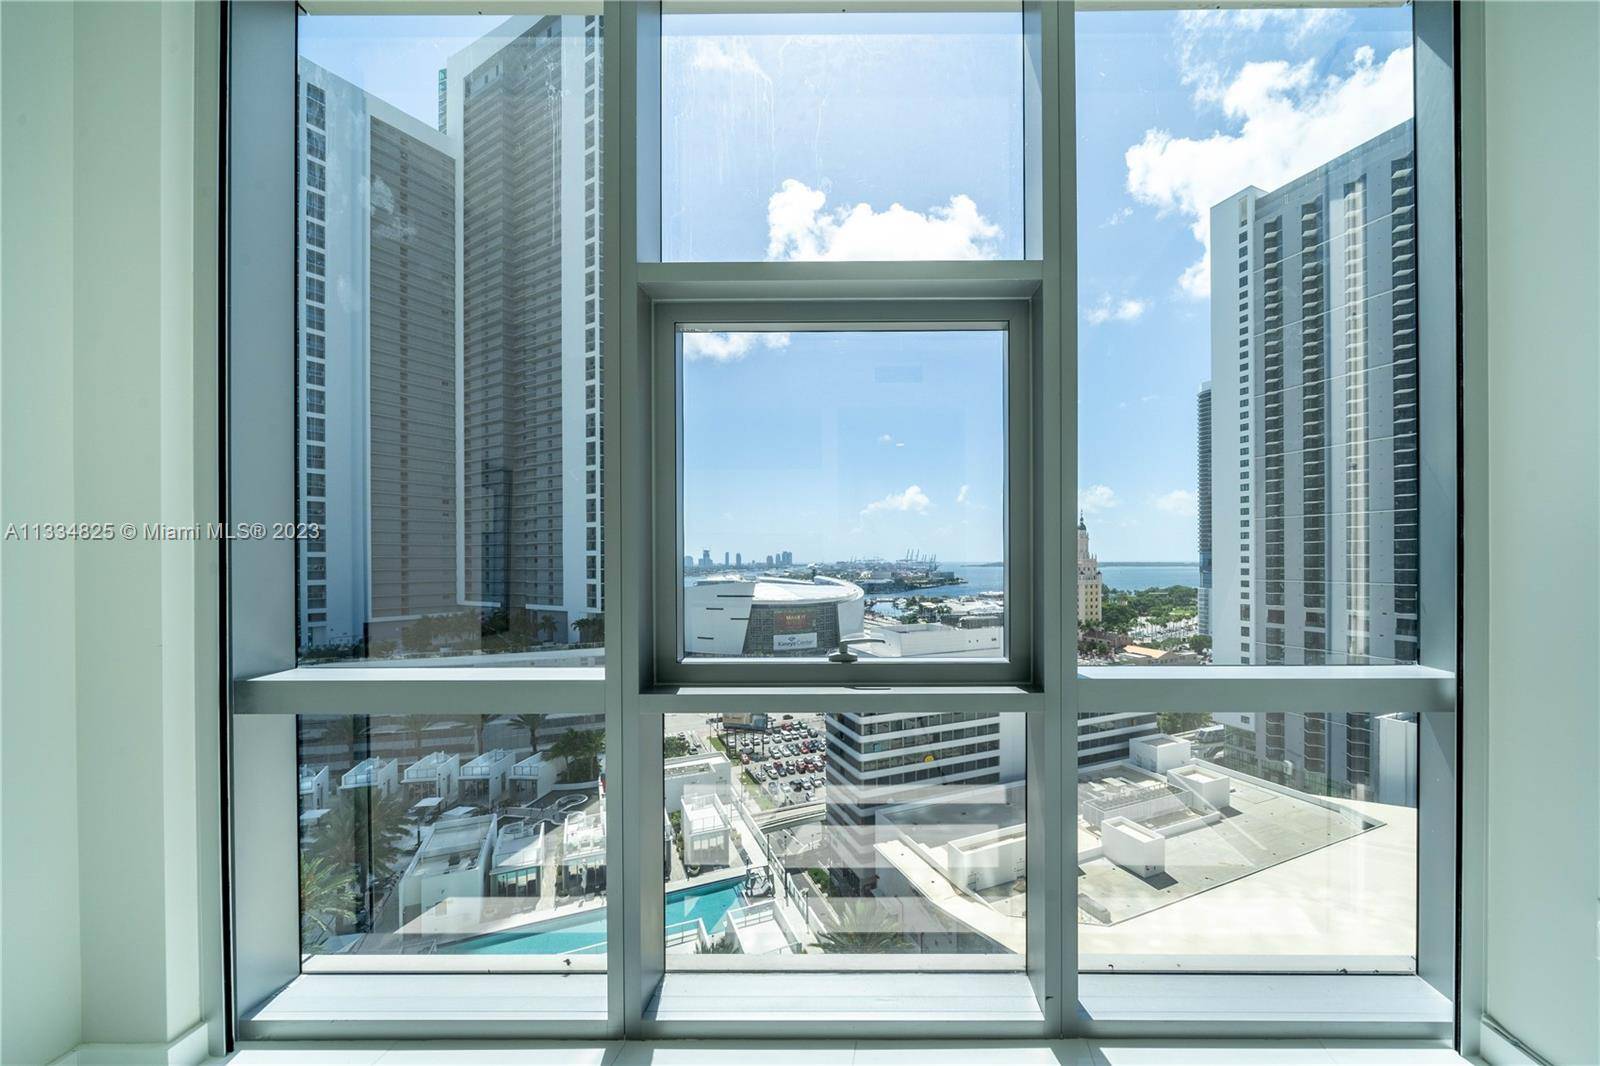 PRICED TO SELL ! Excellent opportunity for this SE Corner 3 bed PLUS DEN 4 bath Residence, 10 Ft ceilings w private elevator foyer at the Miami Paramount World Center.